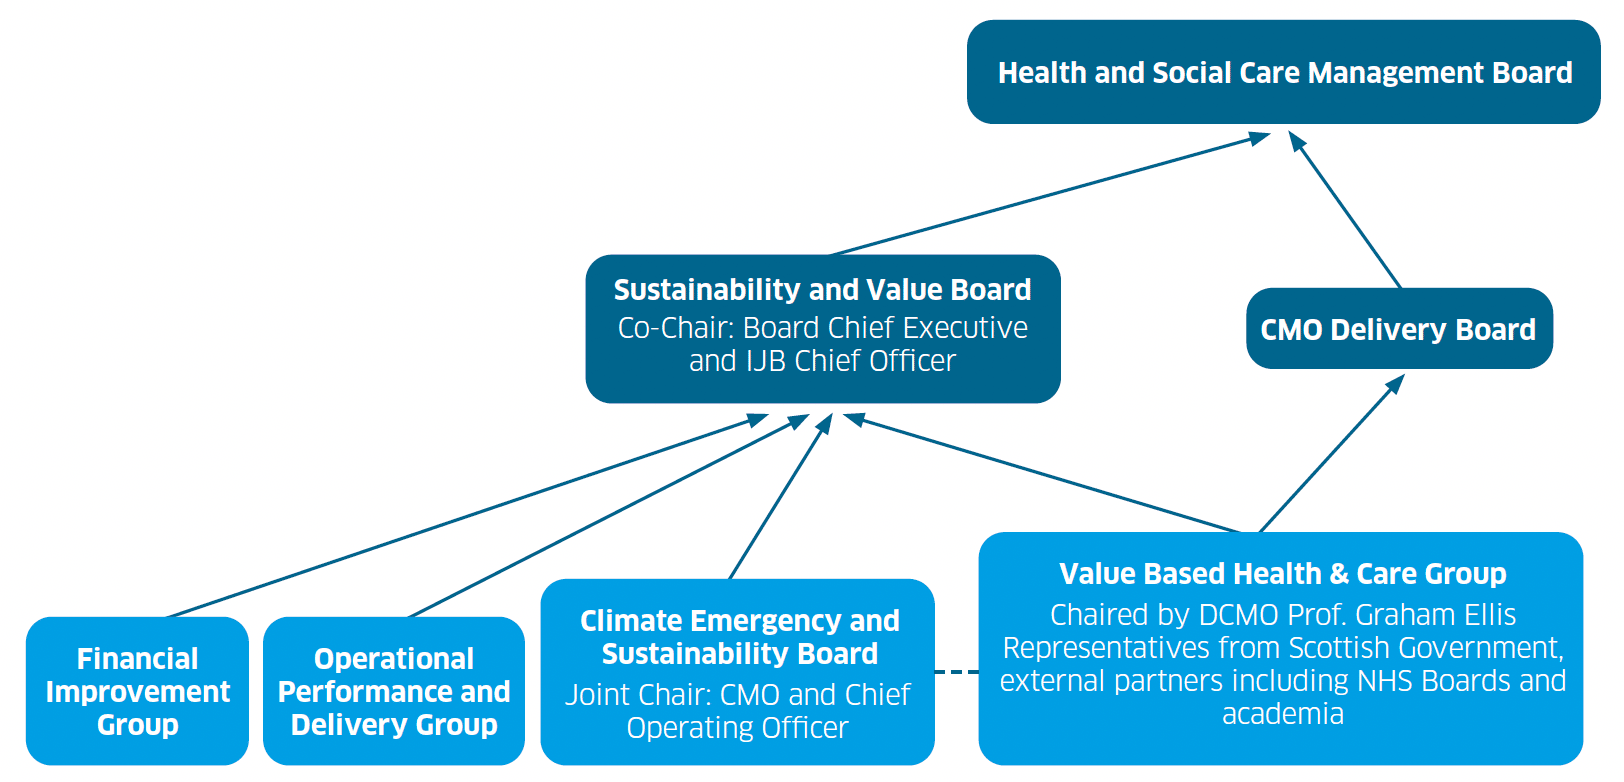 This image shows the governance structure of VBH&C. At the top level is Health & Social Care Management board. Below this level there are 2 boxes: Sustainability and Value board and CMO Delivery board. On the bottom level there are 4 boxes: Financial Improvement Group, Operational Performance and Delivery Group, Climate Emergency and Sustainability Board and Value Based Health & Care group. The bottom 4 boxes are linked by arrows to the Sustainability and Value Board, which is then linked by an arrow to the Health and Social Care Management Board box. The Value Based Health & Care box also links by an arrow to the CMO Delivery board, which in turn links to the Health and Social Care Management Board box. 